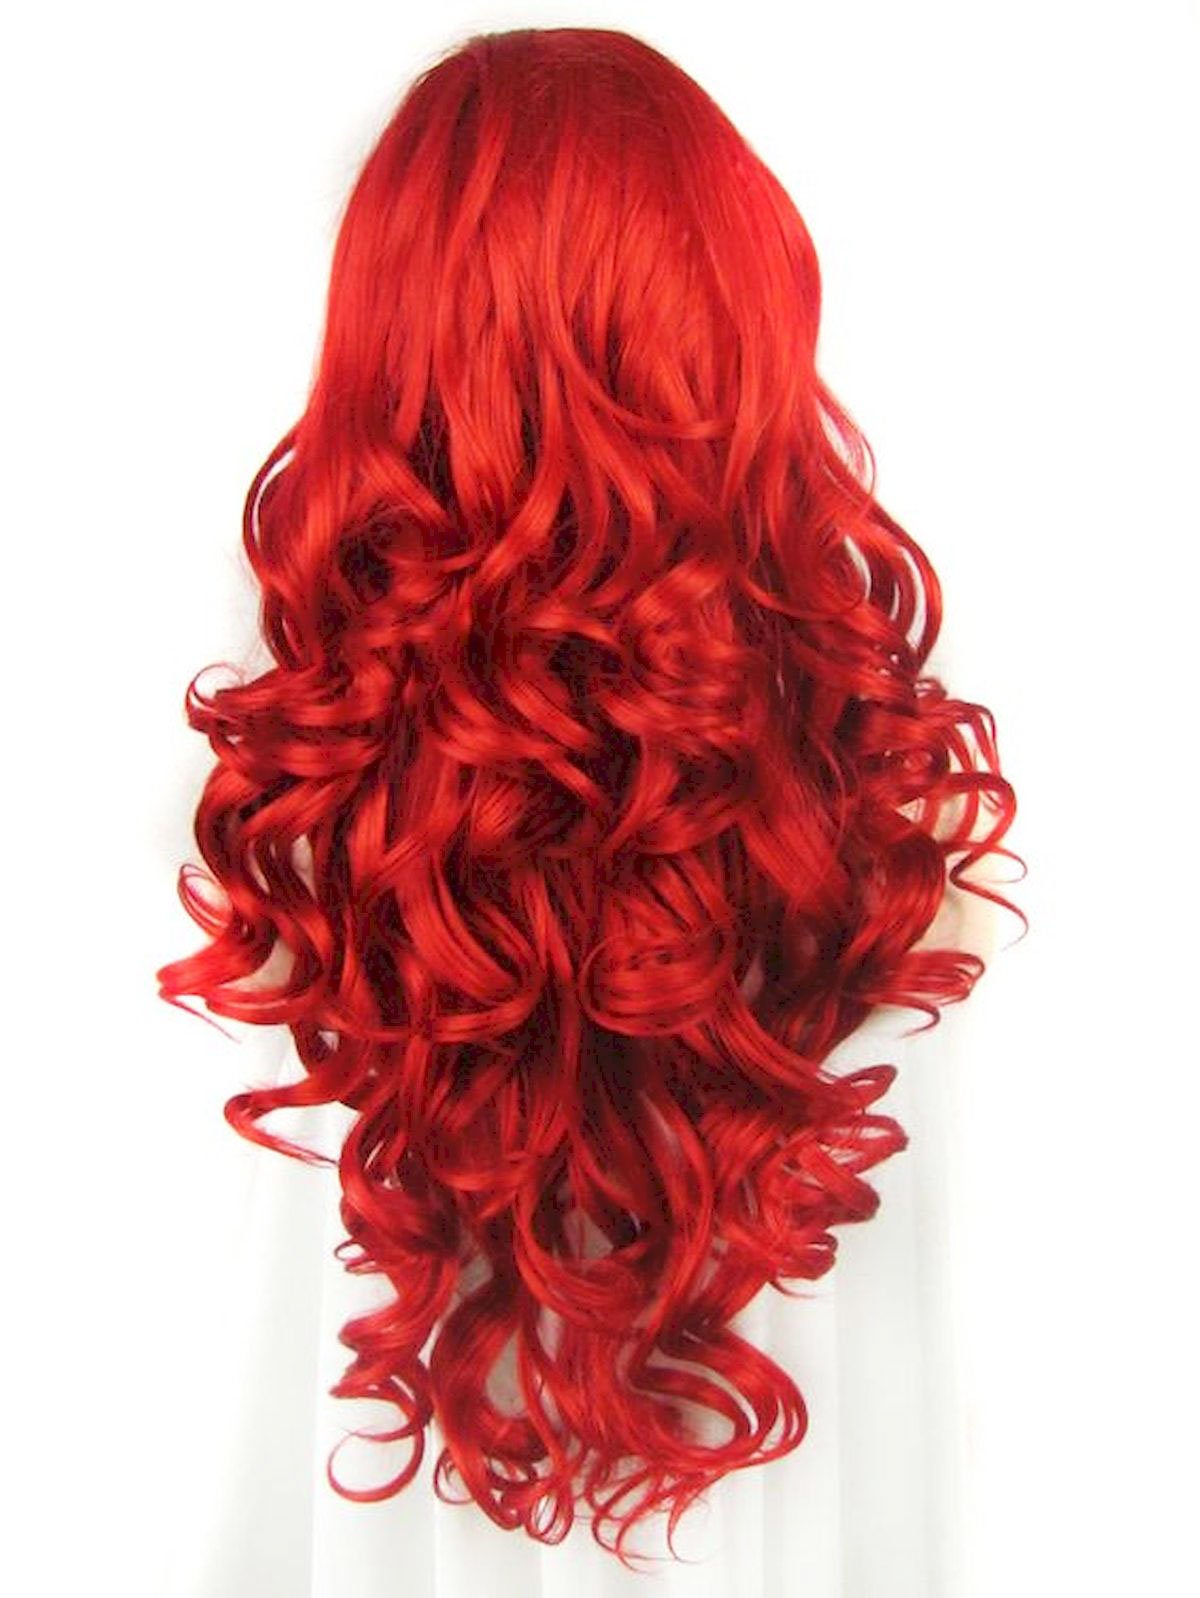 Awesome-Red-Hair-Color-Ideas